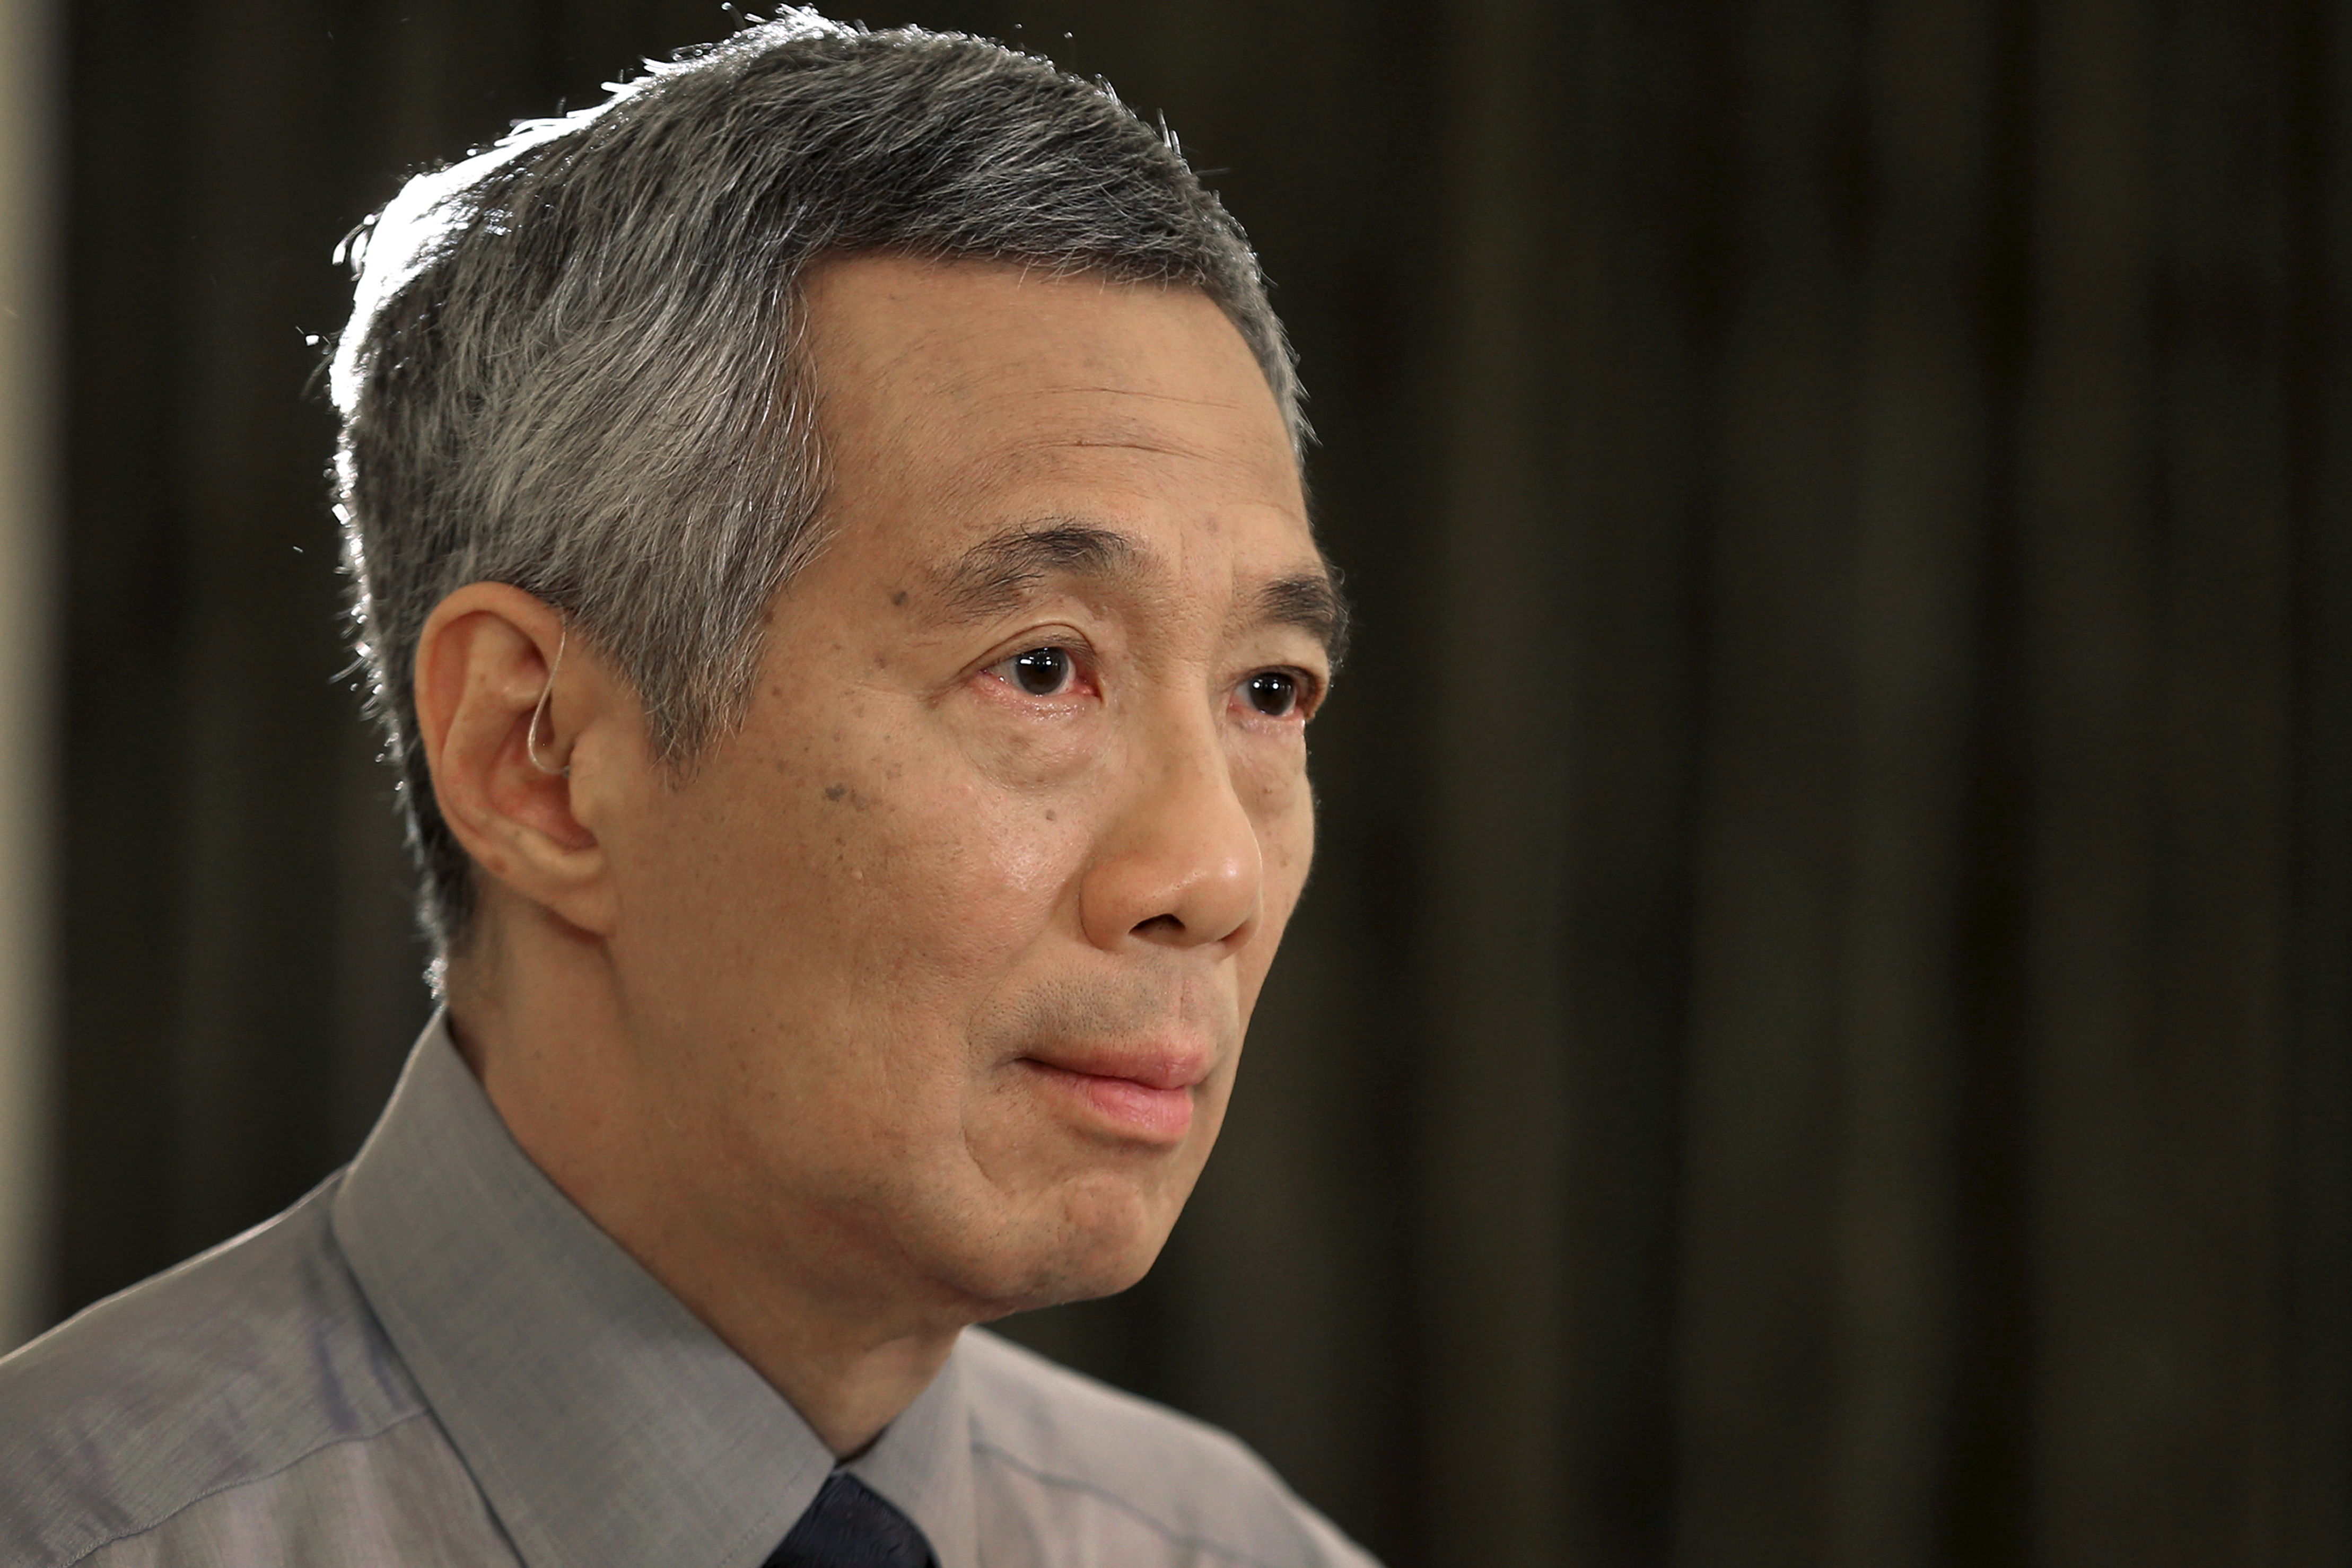 Lee Hsien Loong : Lee Hsien Loong Contact Info, House Address, Email Address